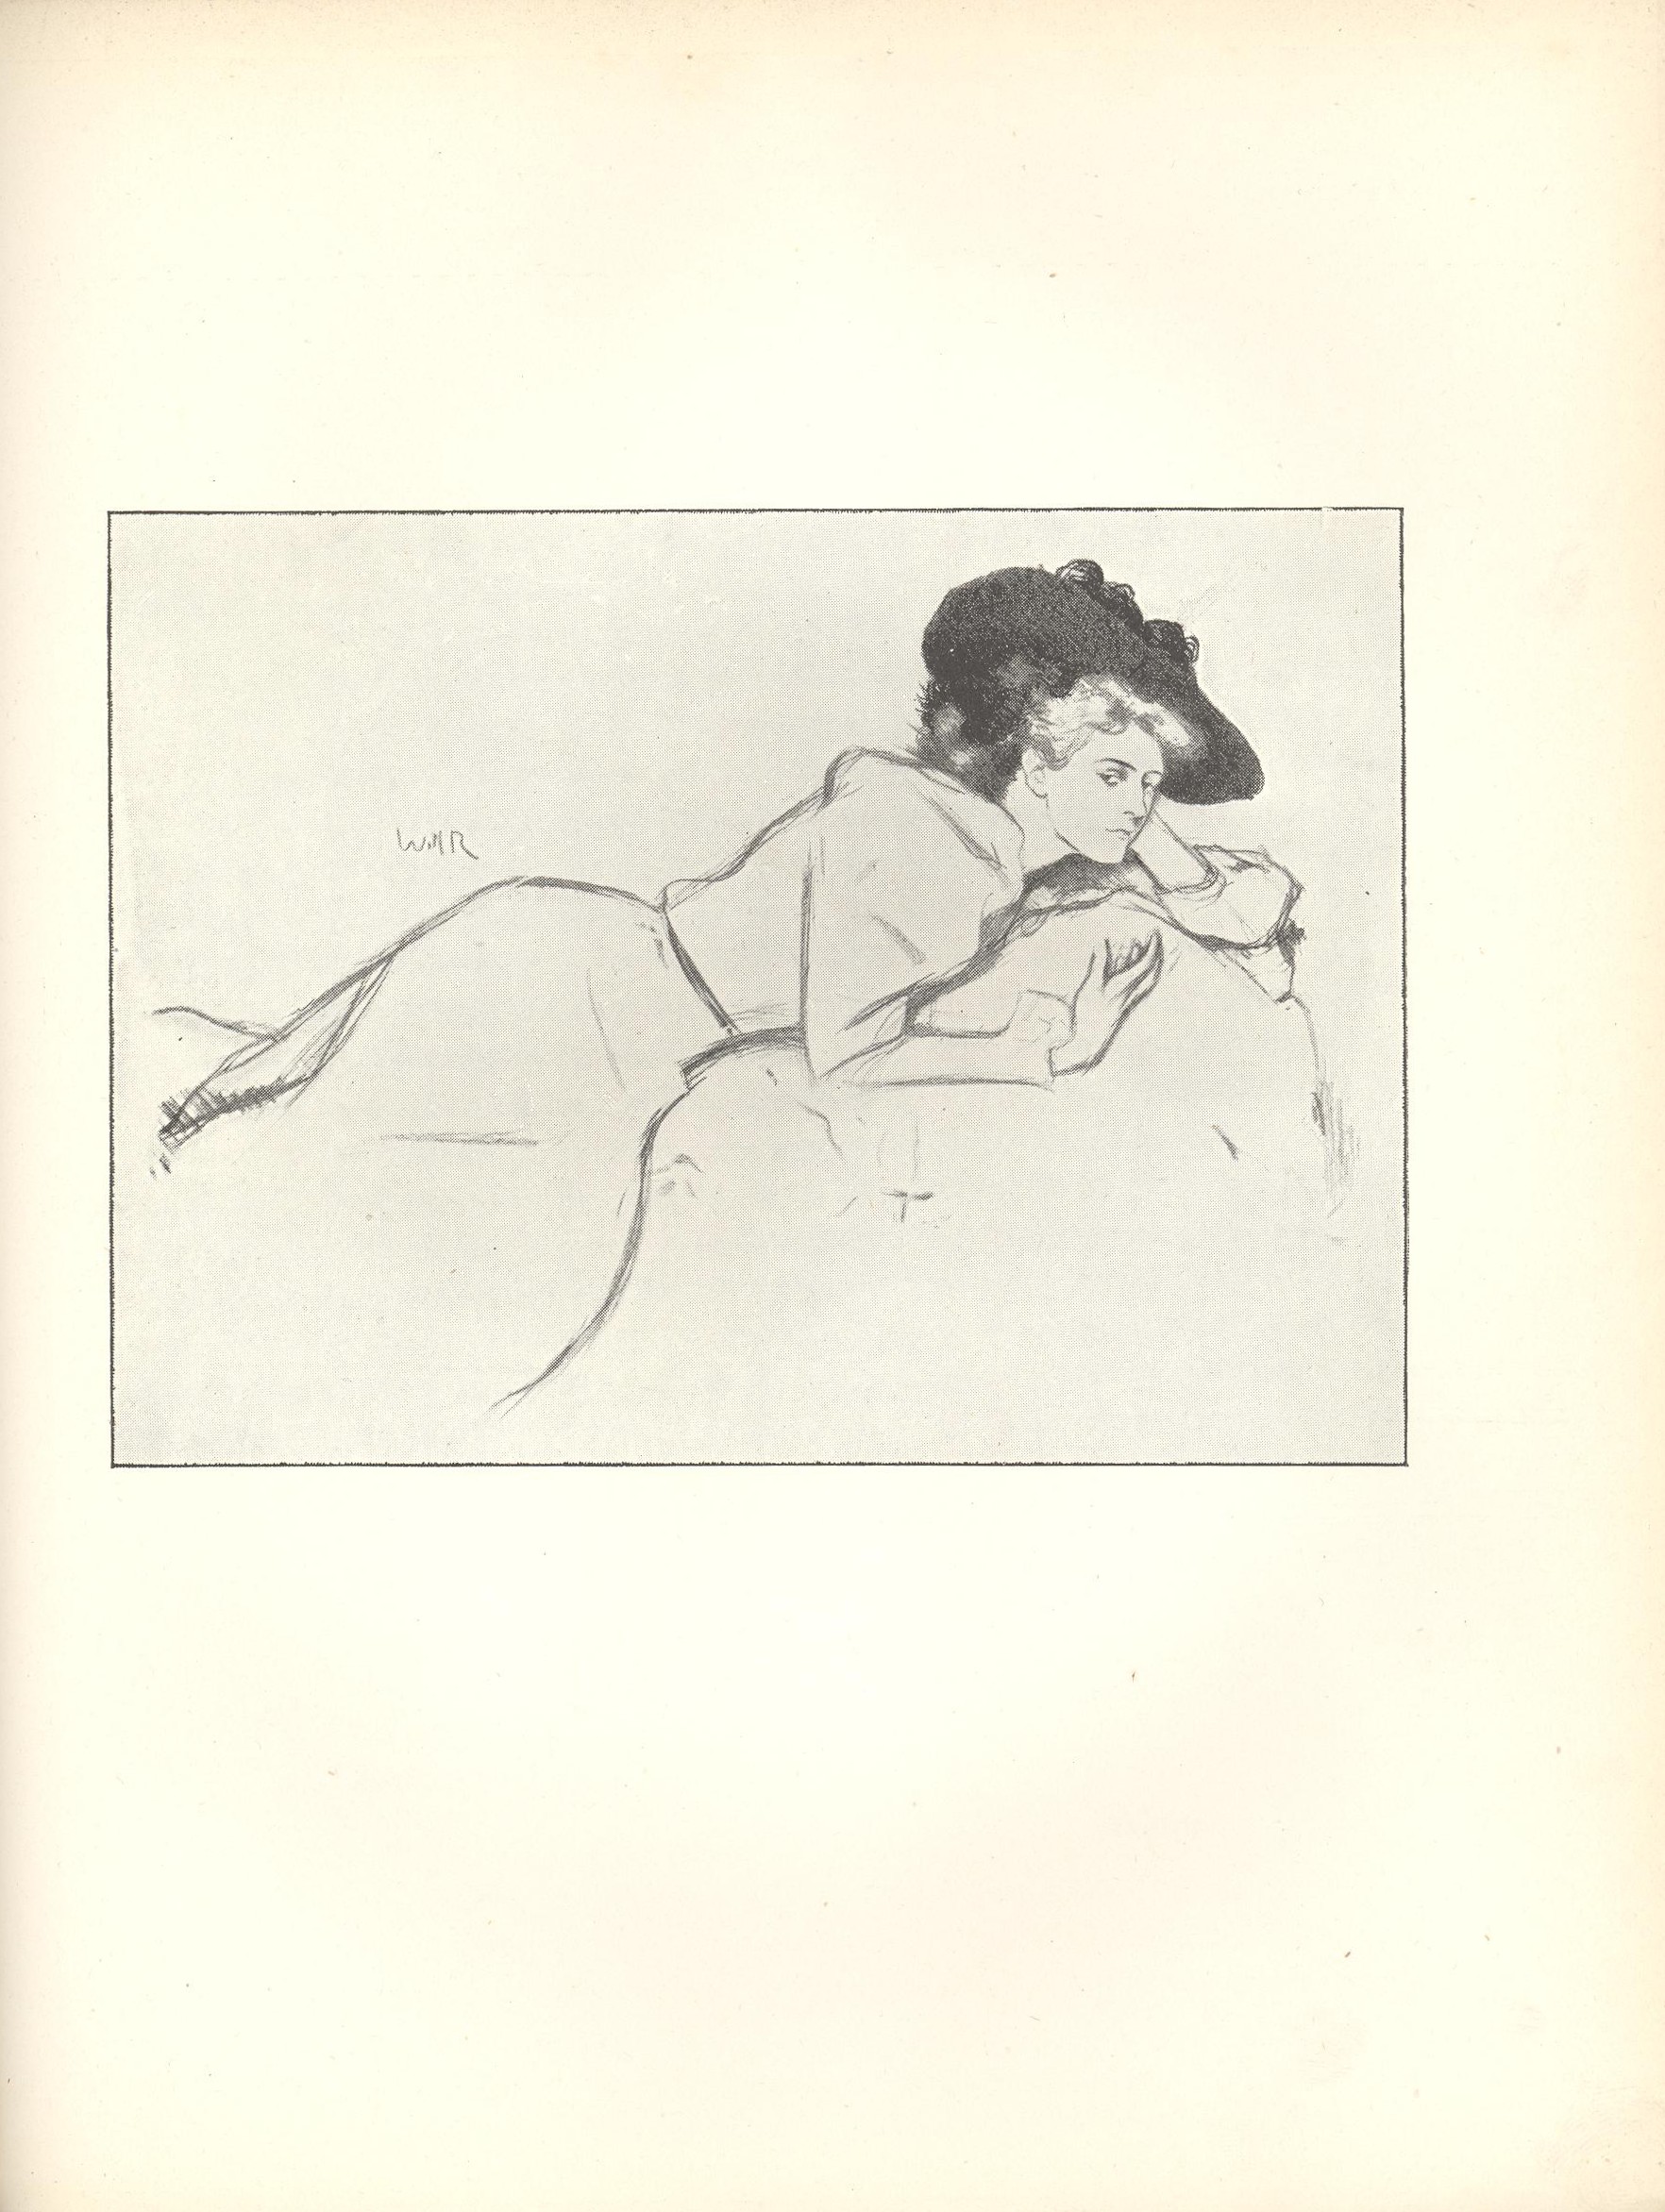 mage is of a young woman in a skirt and blouse with a large black hat reclining frontally on a pillow She is in a 3 4 profile position with eyes looking to the left Her body extends from the lower left corner to the upper right corner dividing the page in half diagonally Her head is supported in her left hand her eyes are looking back Her right hand is resting against the pillow fingers splayed The background is open and light coloured The artist s signature is in the middle left portion of page above the woman s hip The image is vertically displayed